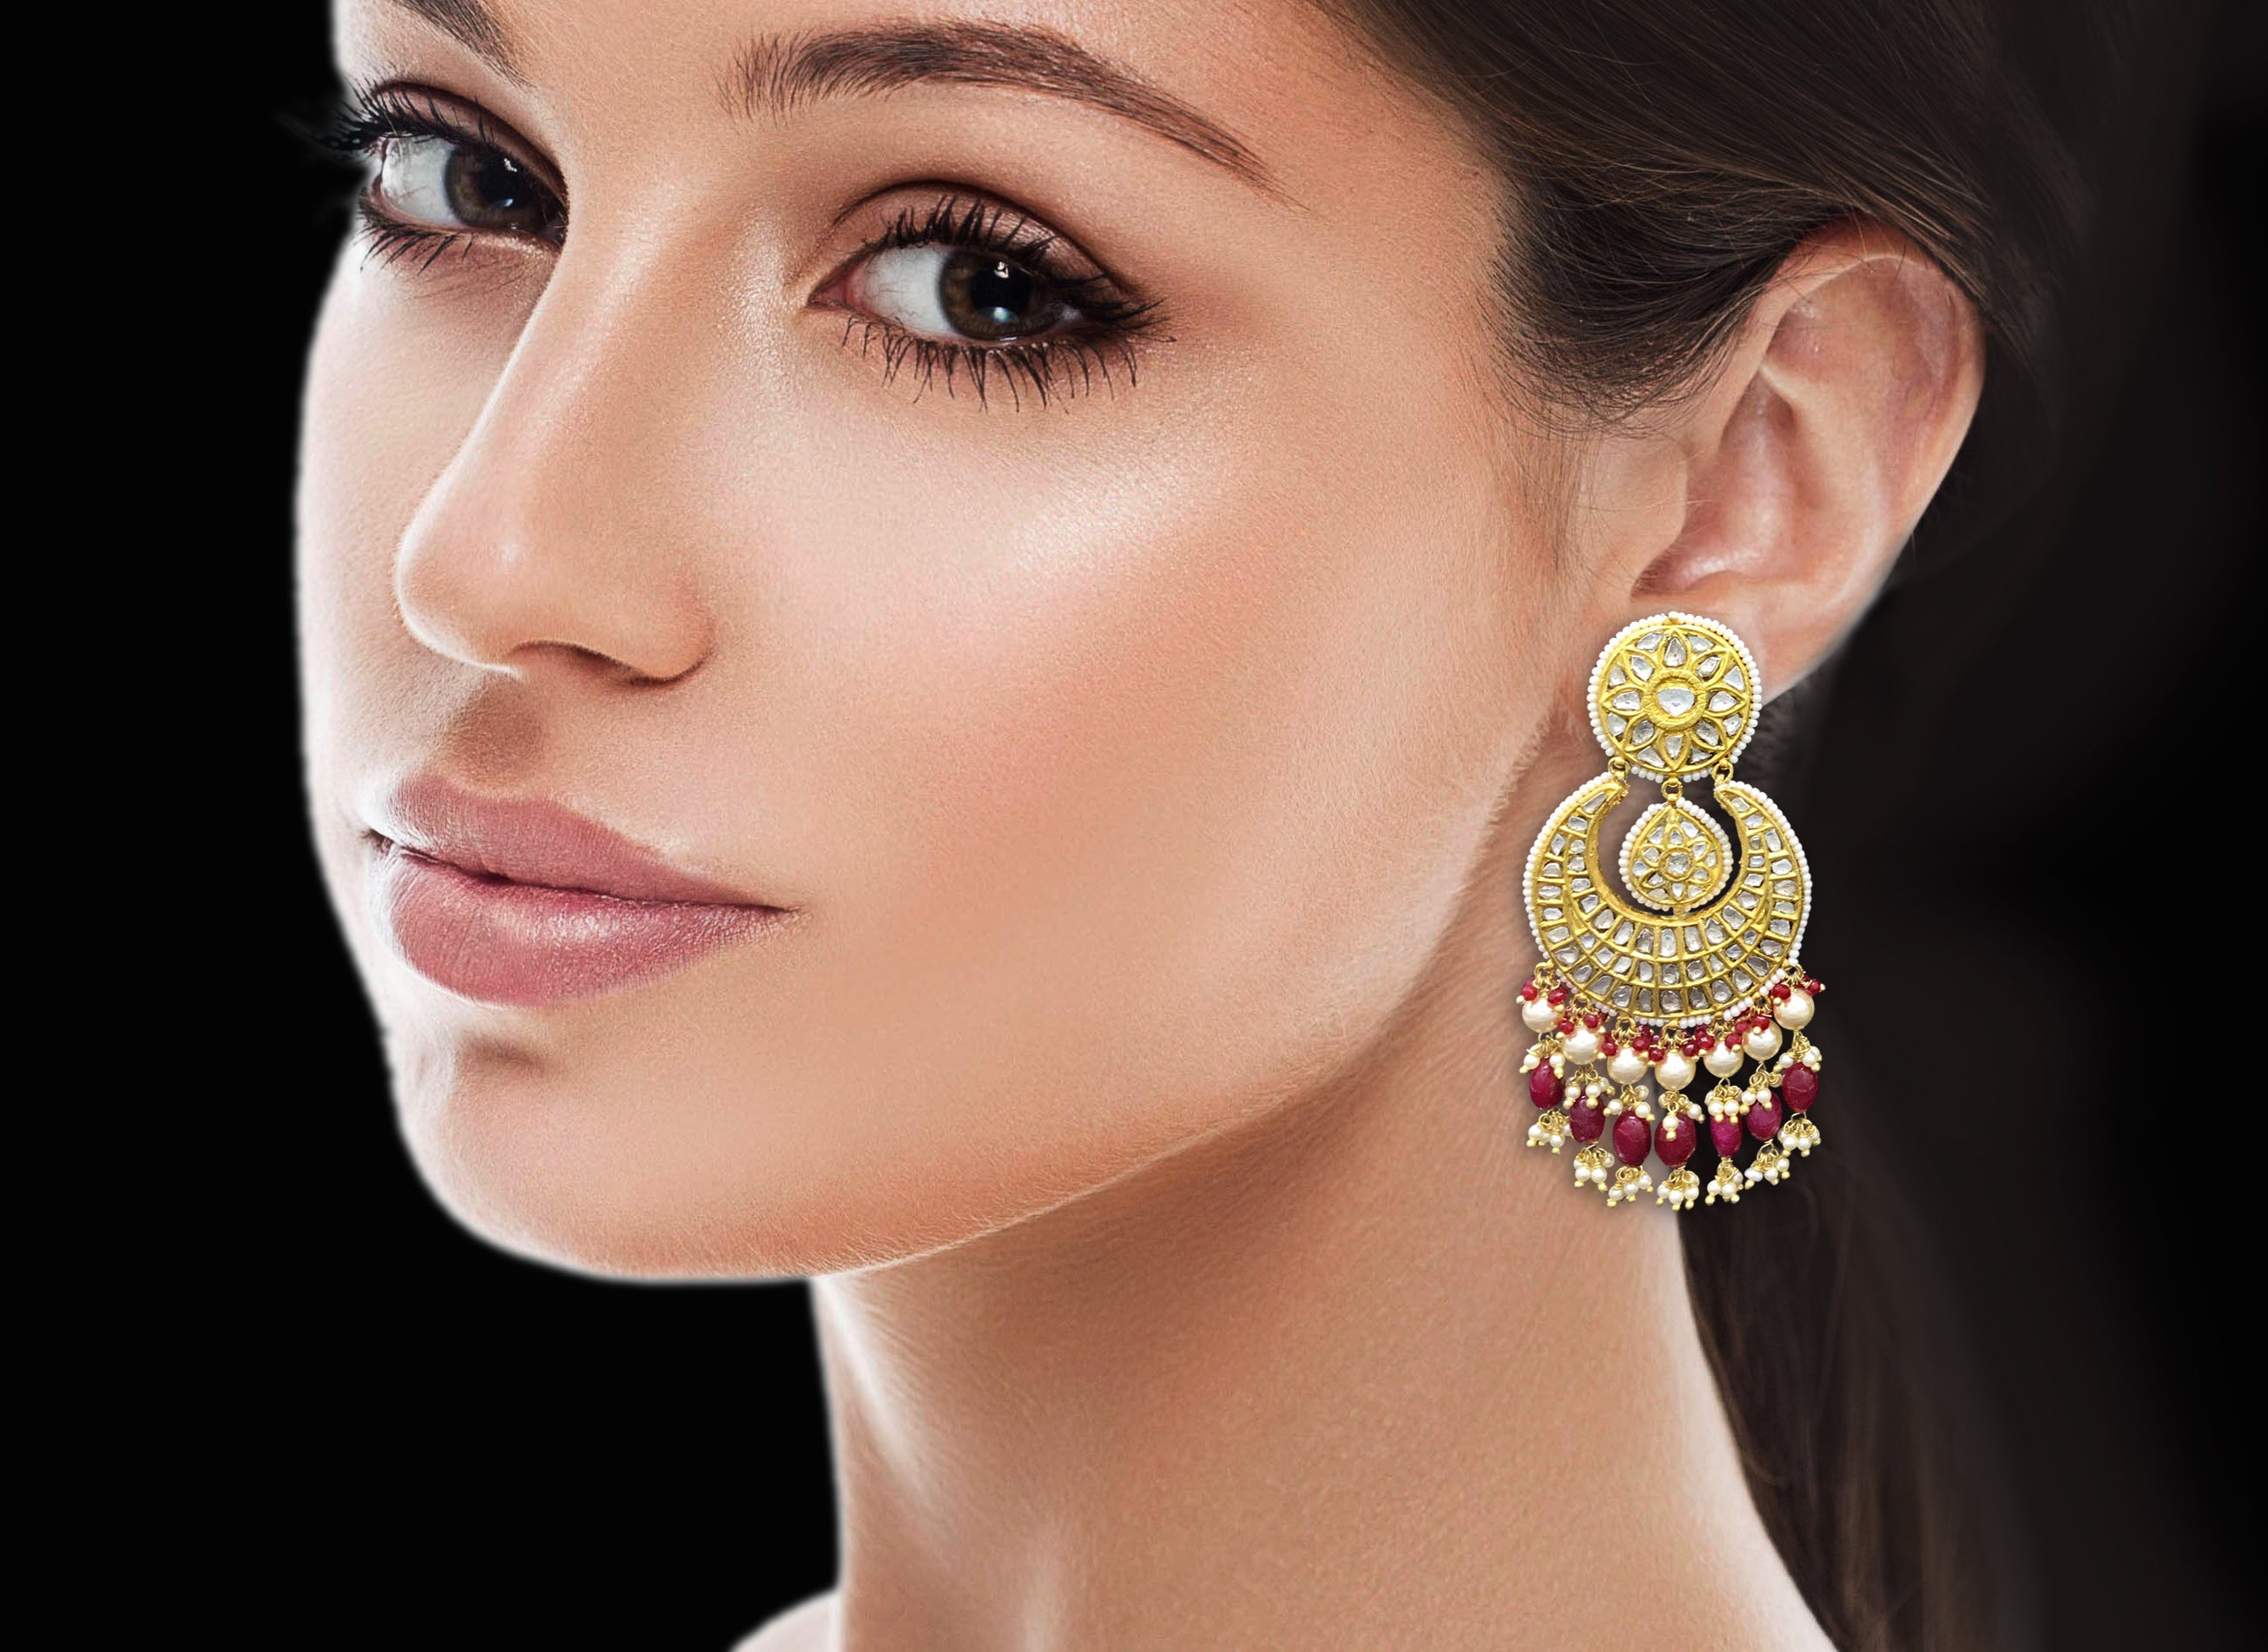 23k Gold and Diamond Polki Chand Bali Earring pair with rubies in chandelier-style - G. K. Ratnam